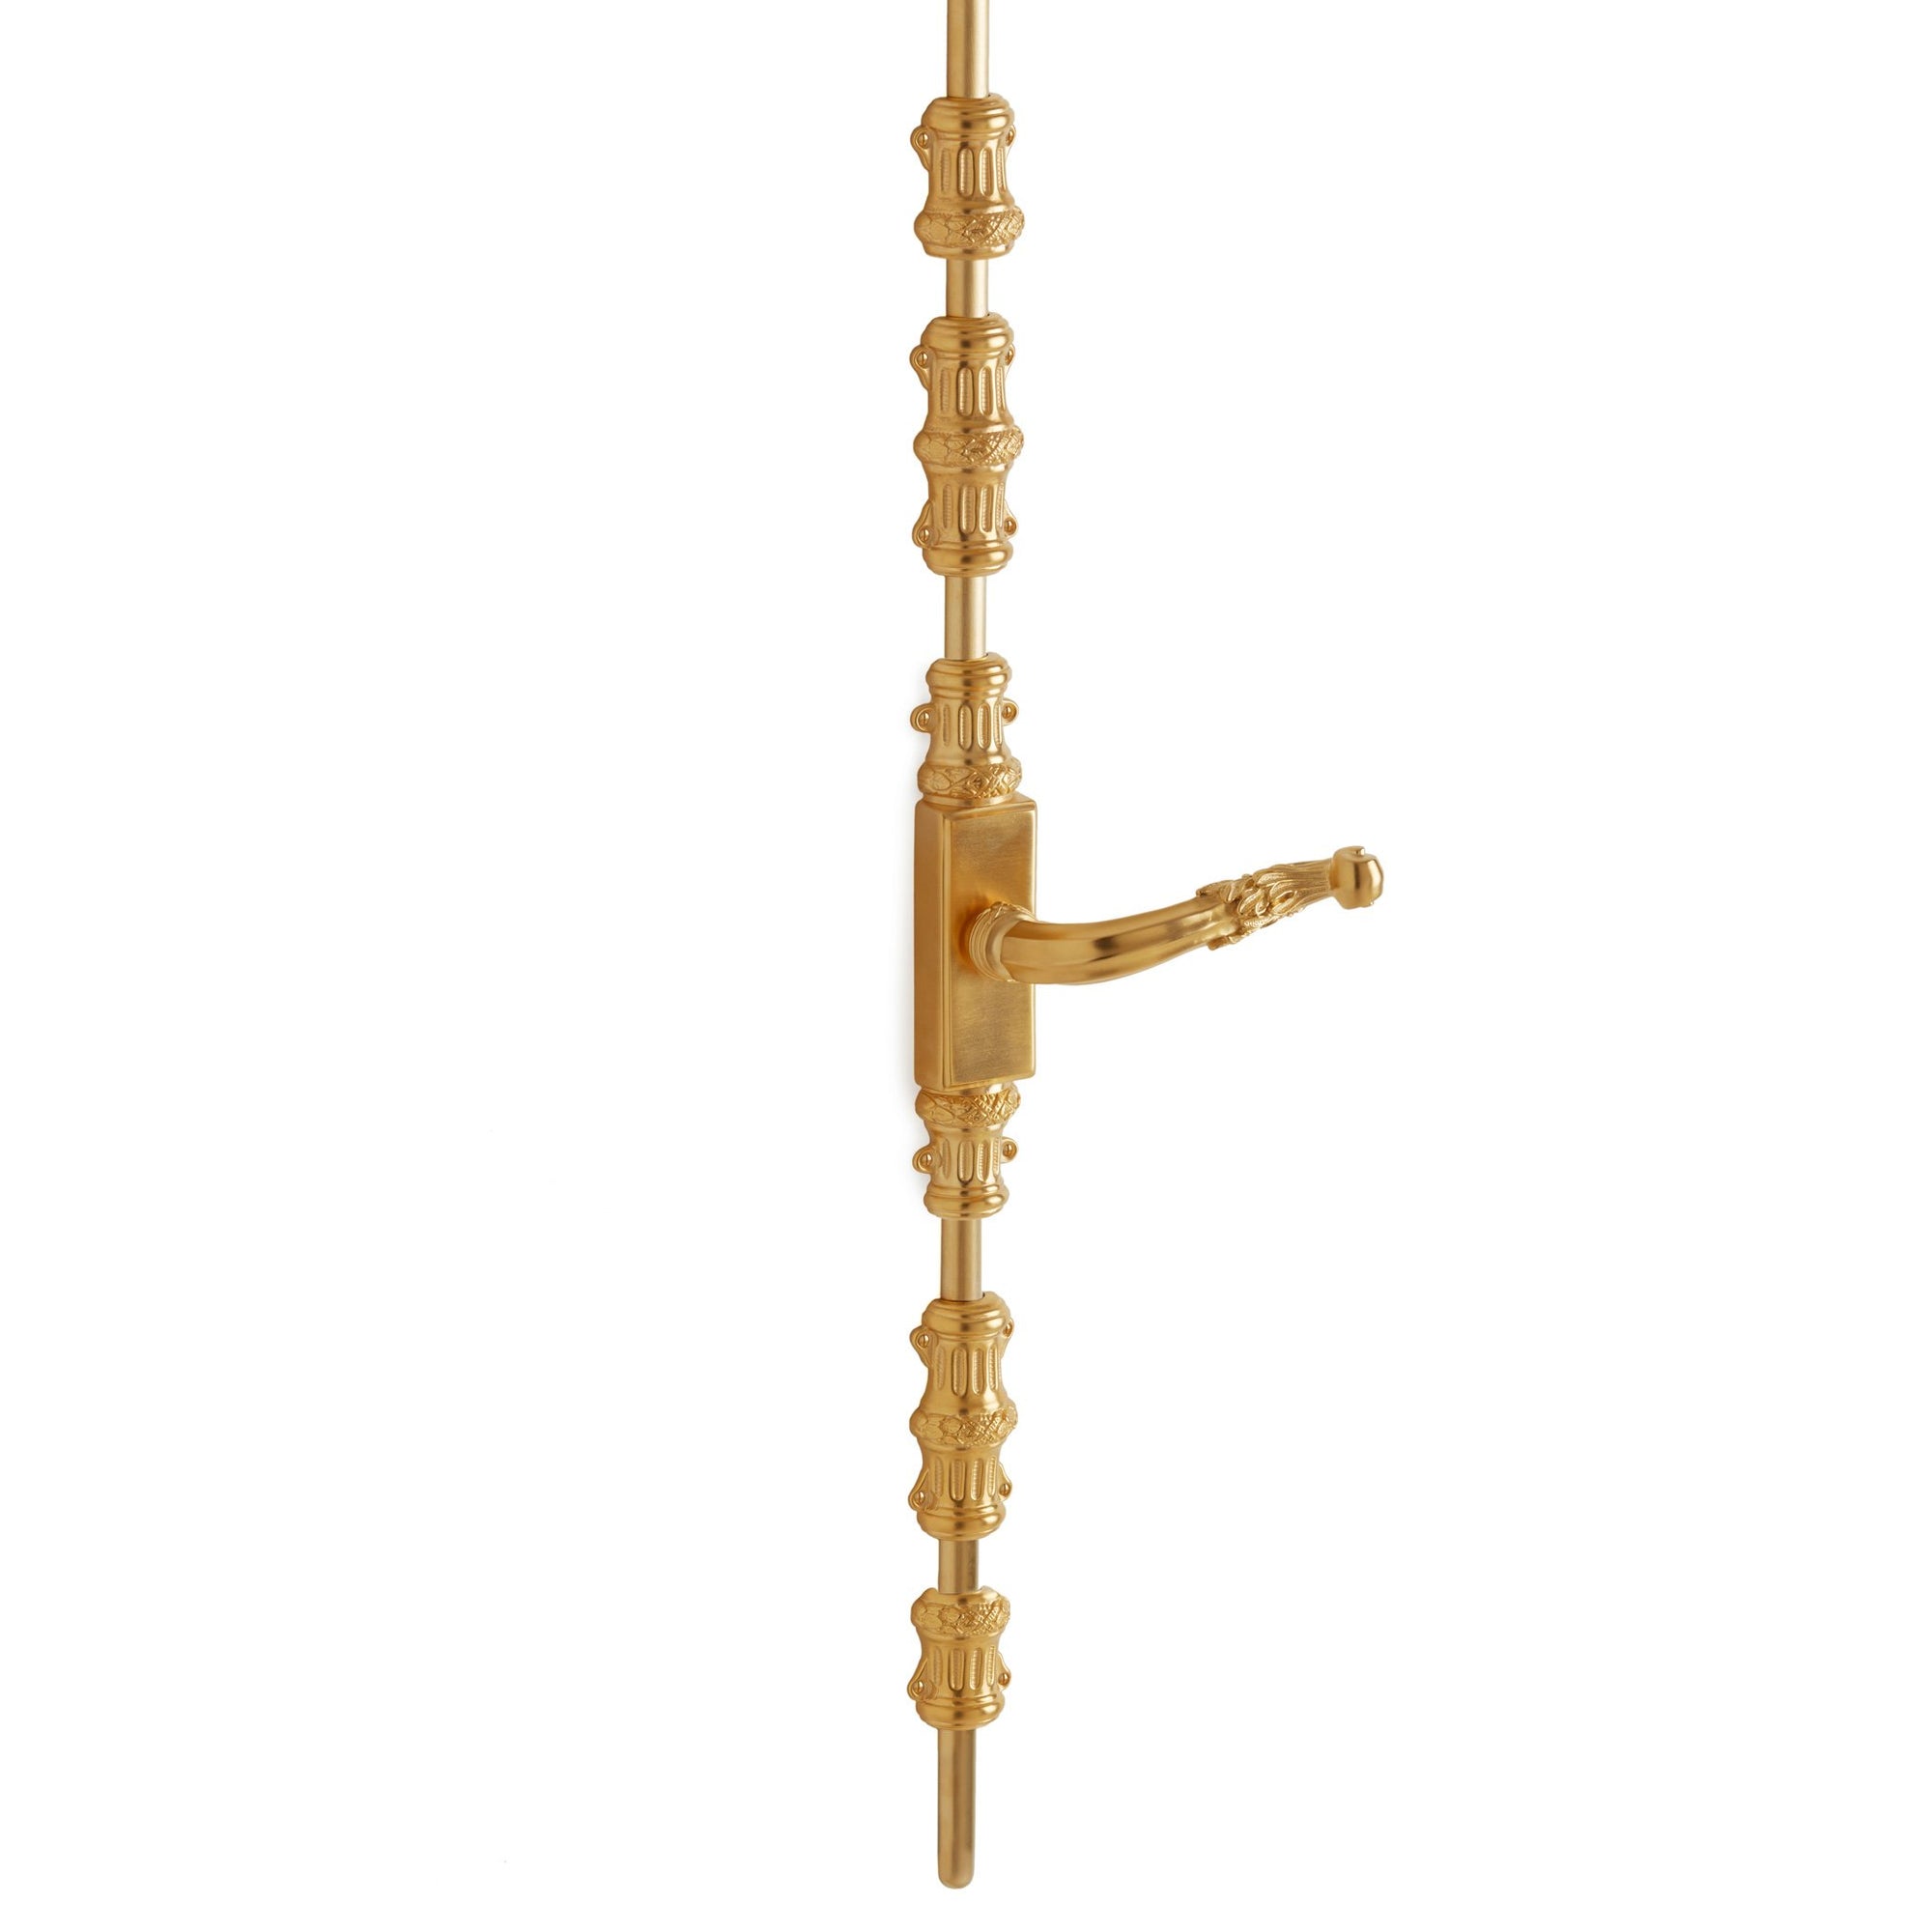 2921-1055DOR-RH-GP Sherle Wagner International Cremone Bolt with Ribbon & Reed Door Lever in Gold Plate metal finish